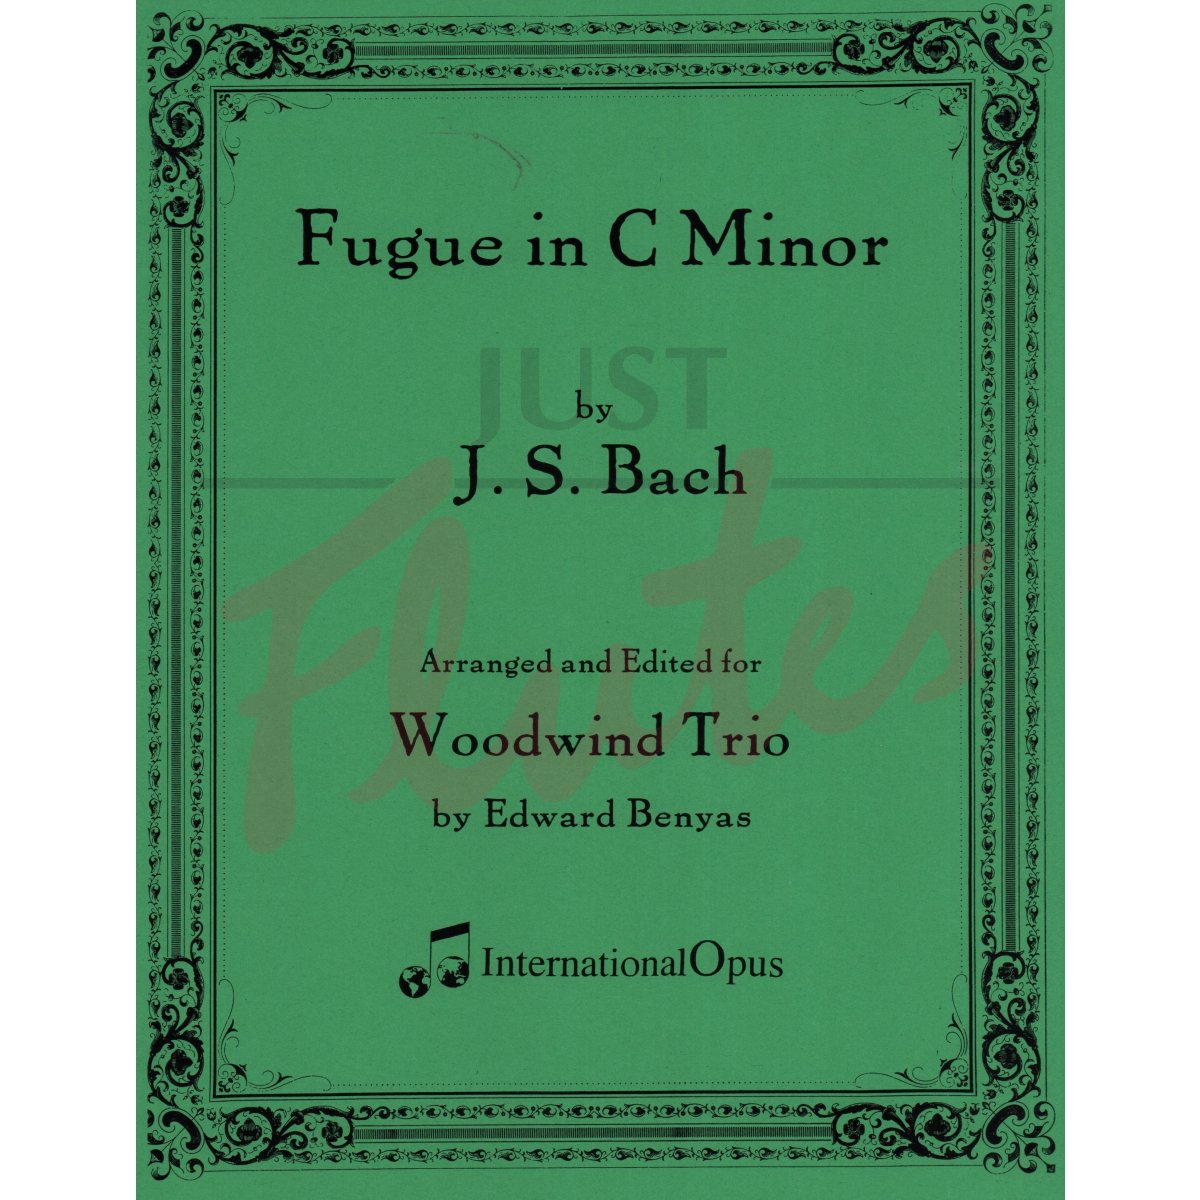 Fugue in C minor for Woodwind Trio